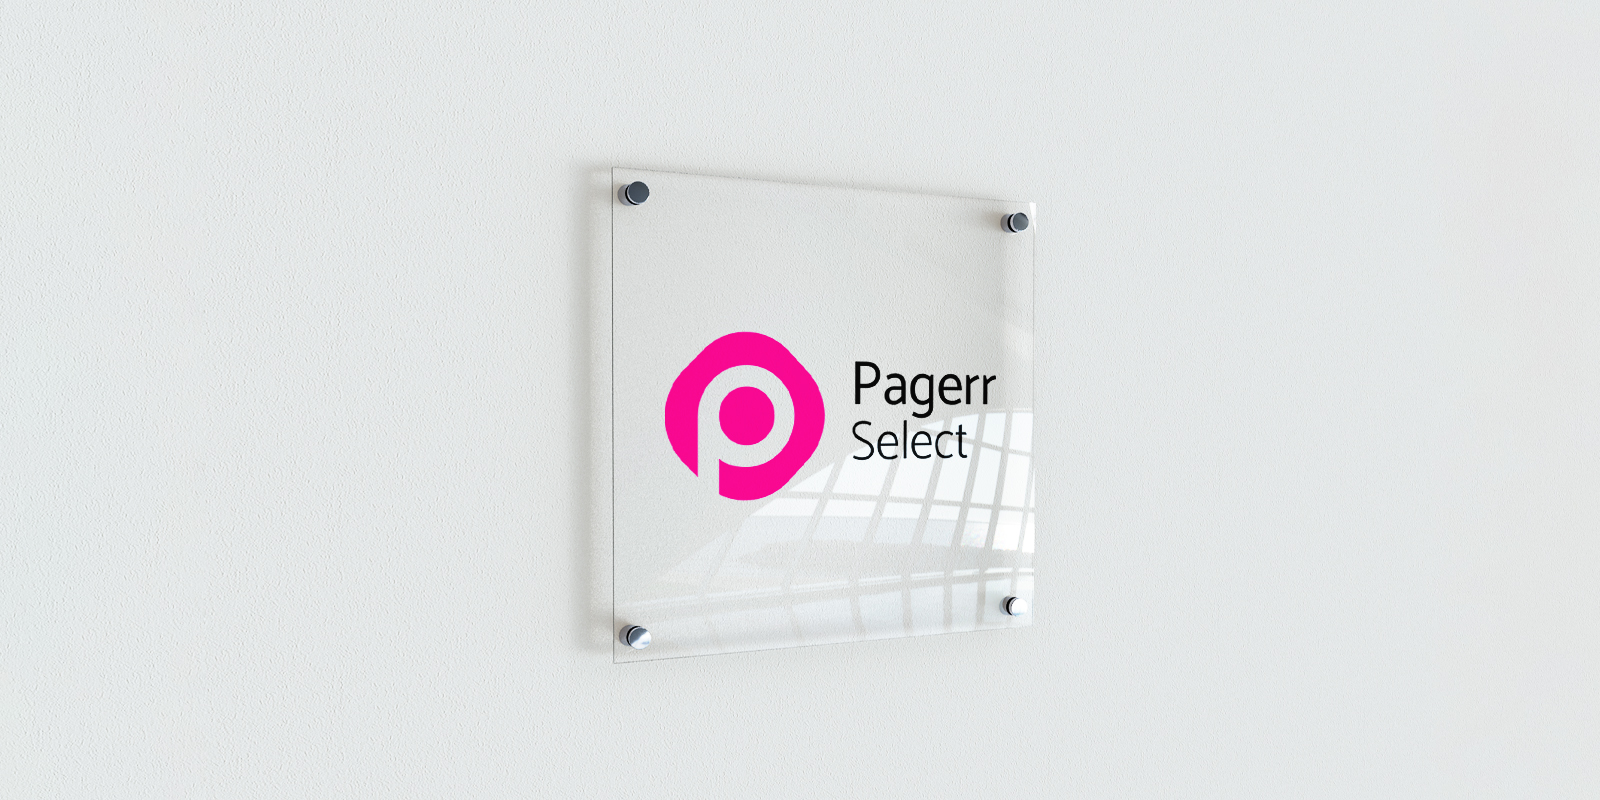 Acrylic signs in Tallinn - Print with Pagerr